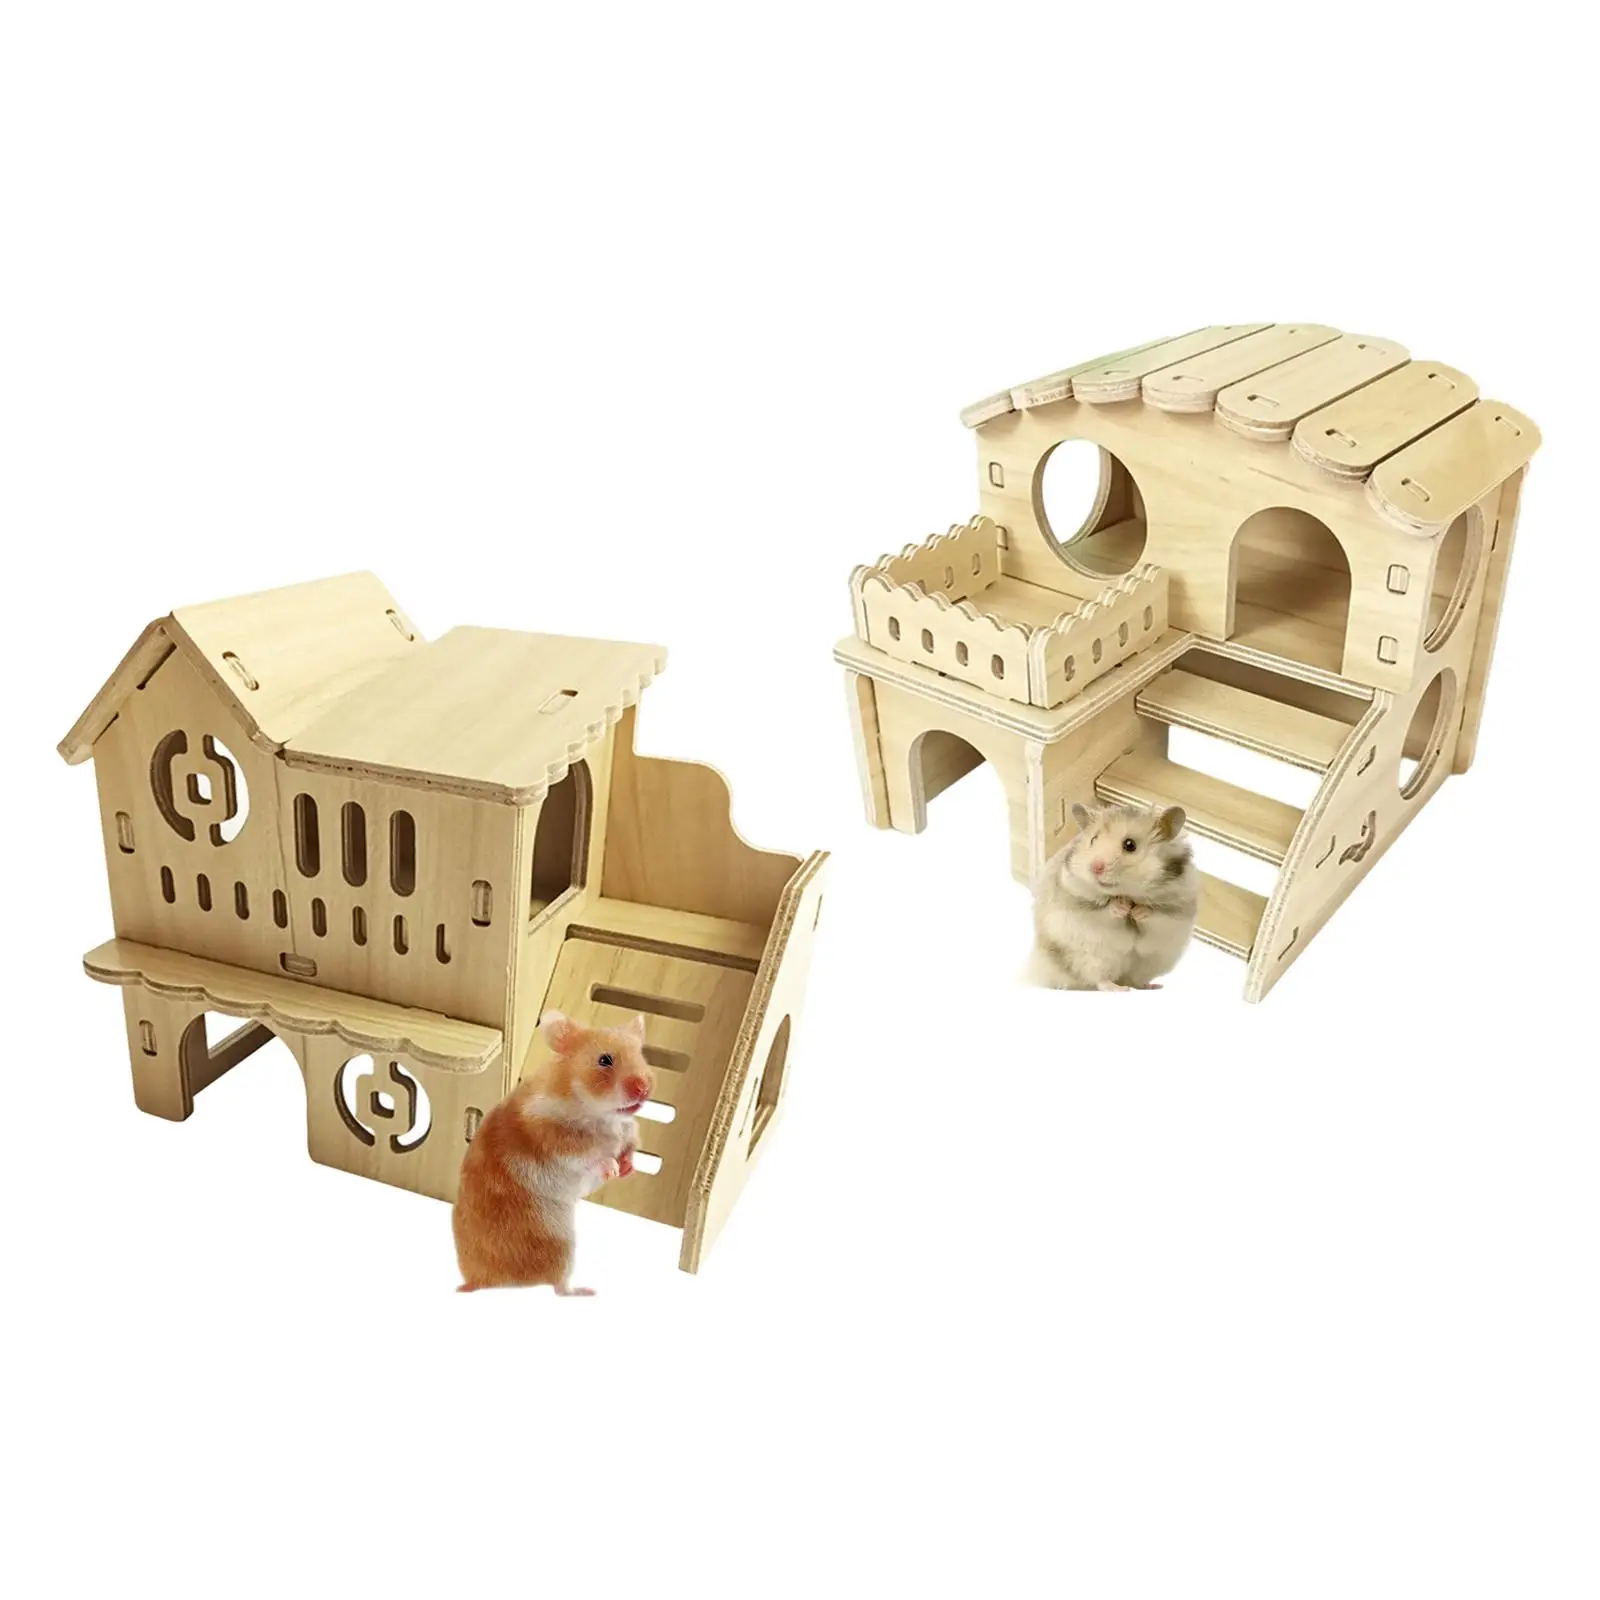 Washable Hamster Hideaway Small Animal Habitat Decor Wood Small Animal Hideout Hut Play Toys Hamster House for Dwarf Mice